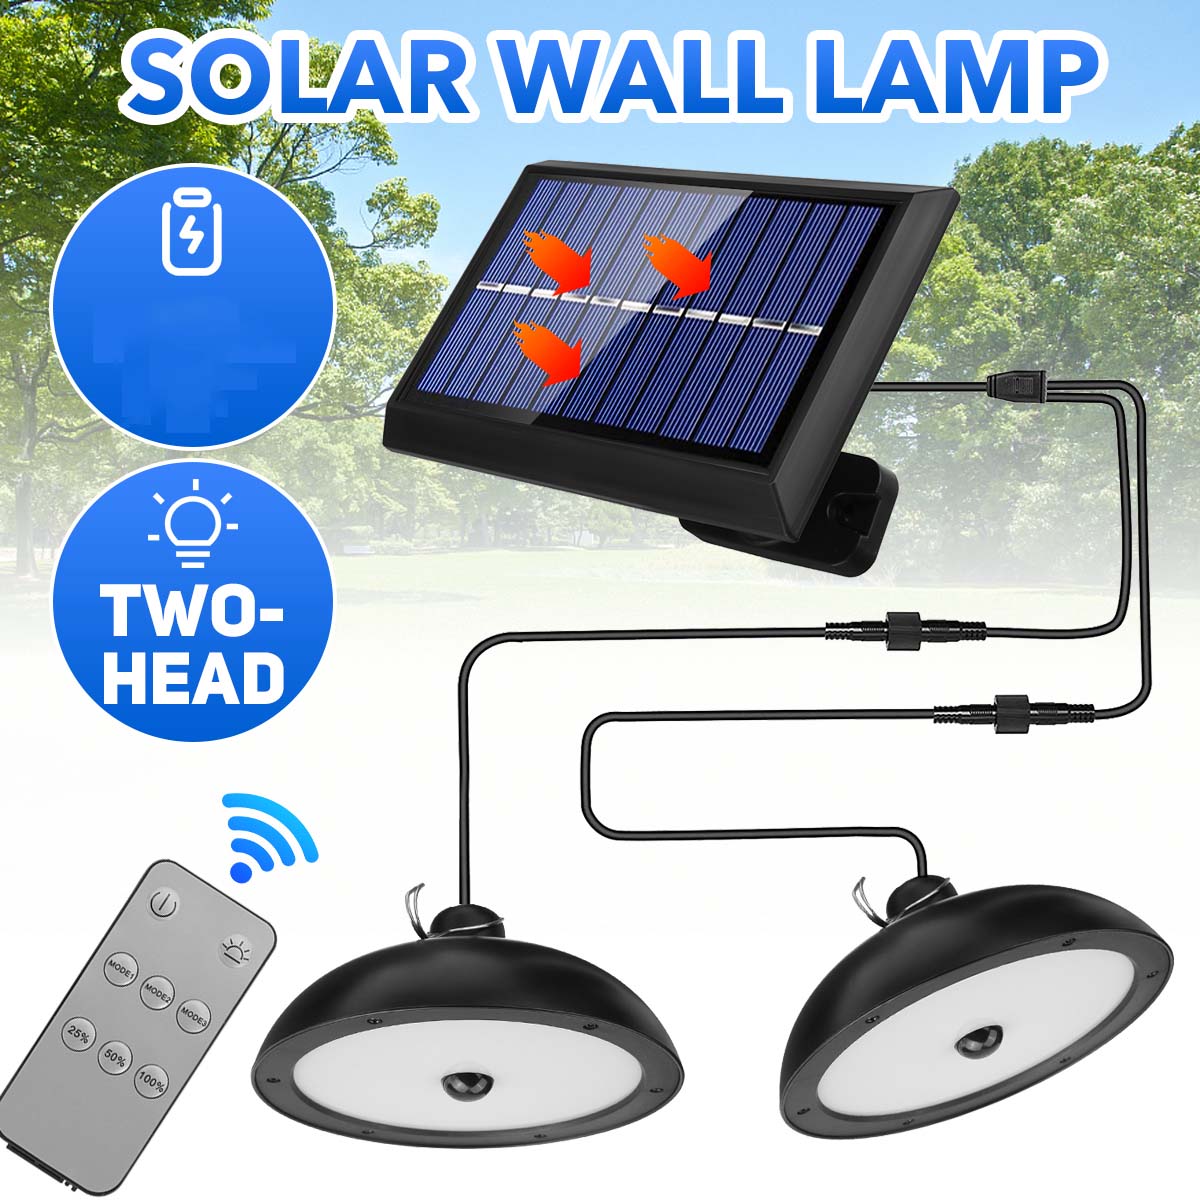 Split-Solar-Light-Remote-Led-Lights-With-Extension-Outdoor-Waterproof-Wall-Lamp-Sunlight-Powered-Lan-1935370-1